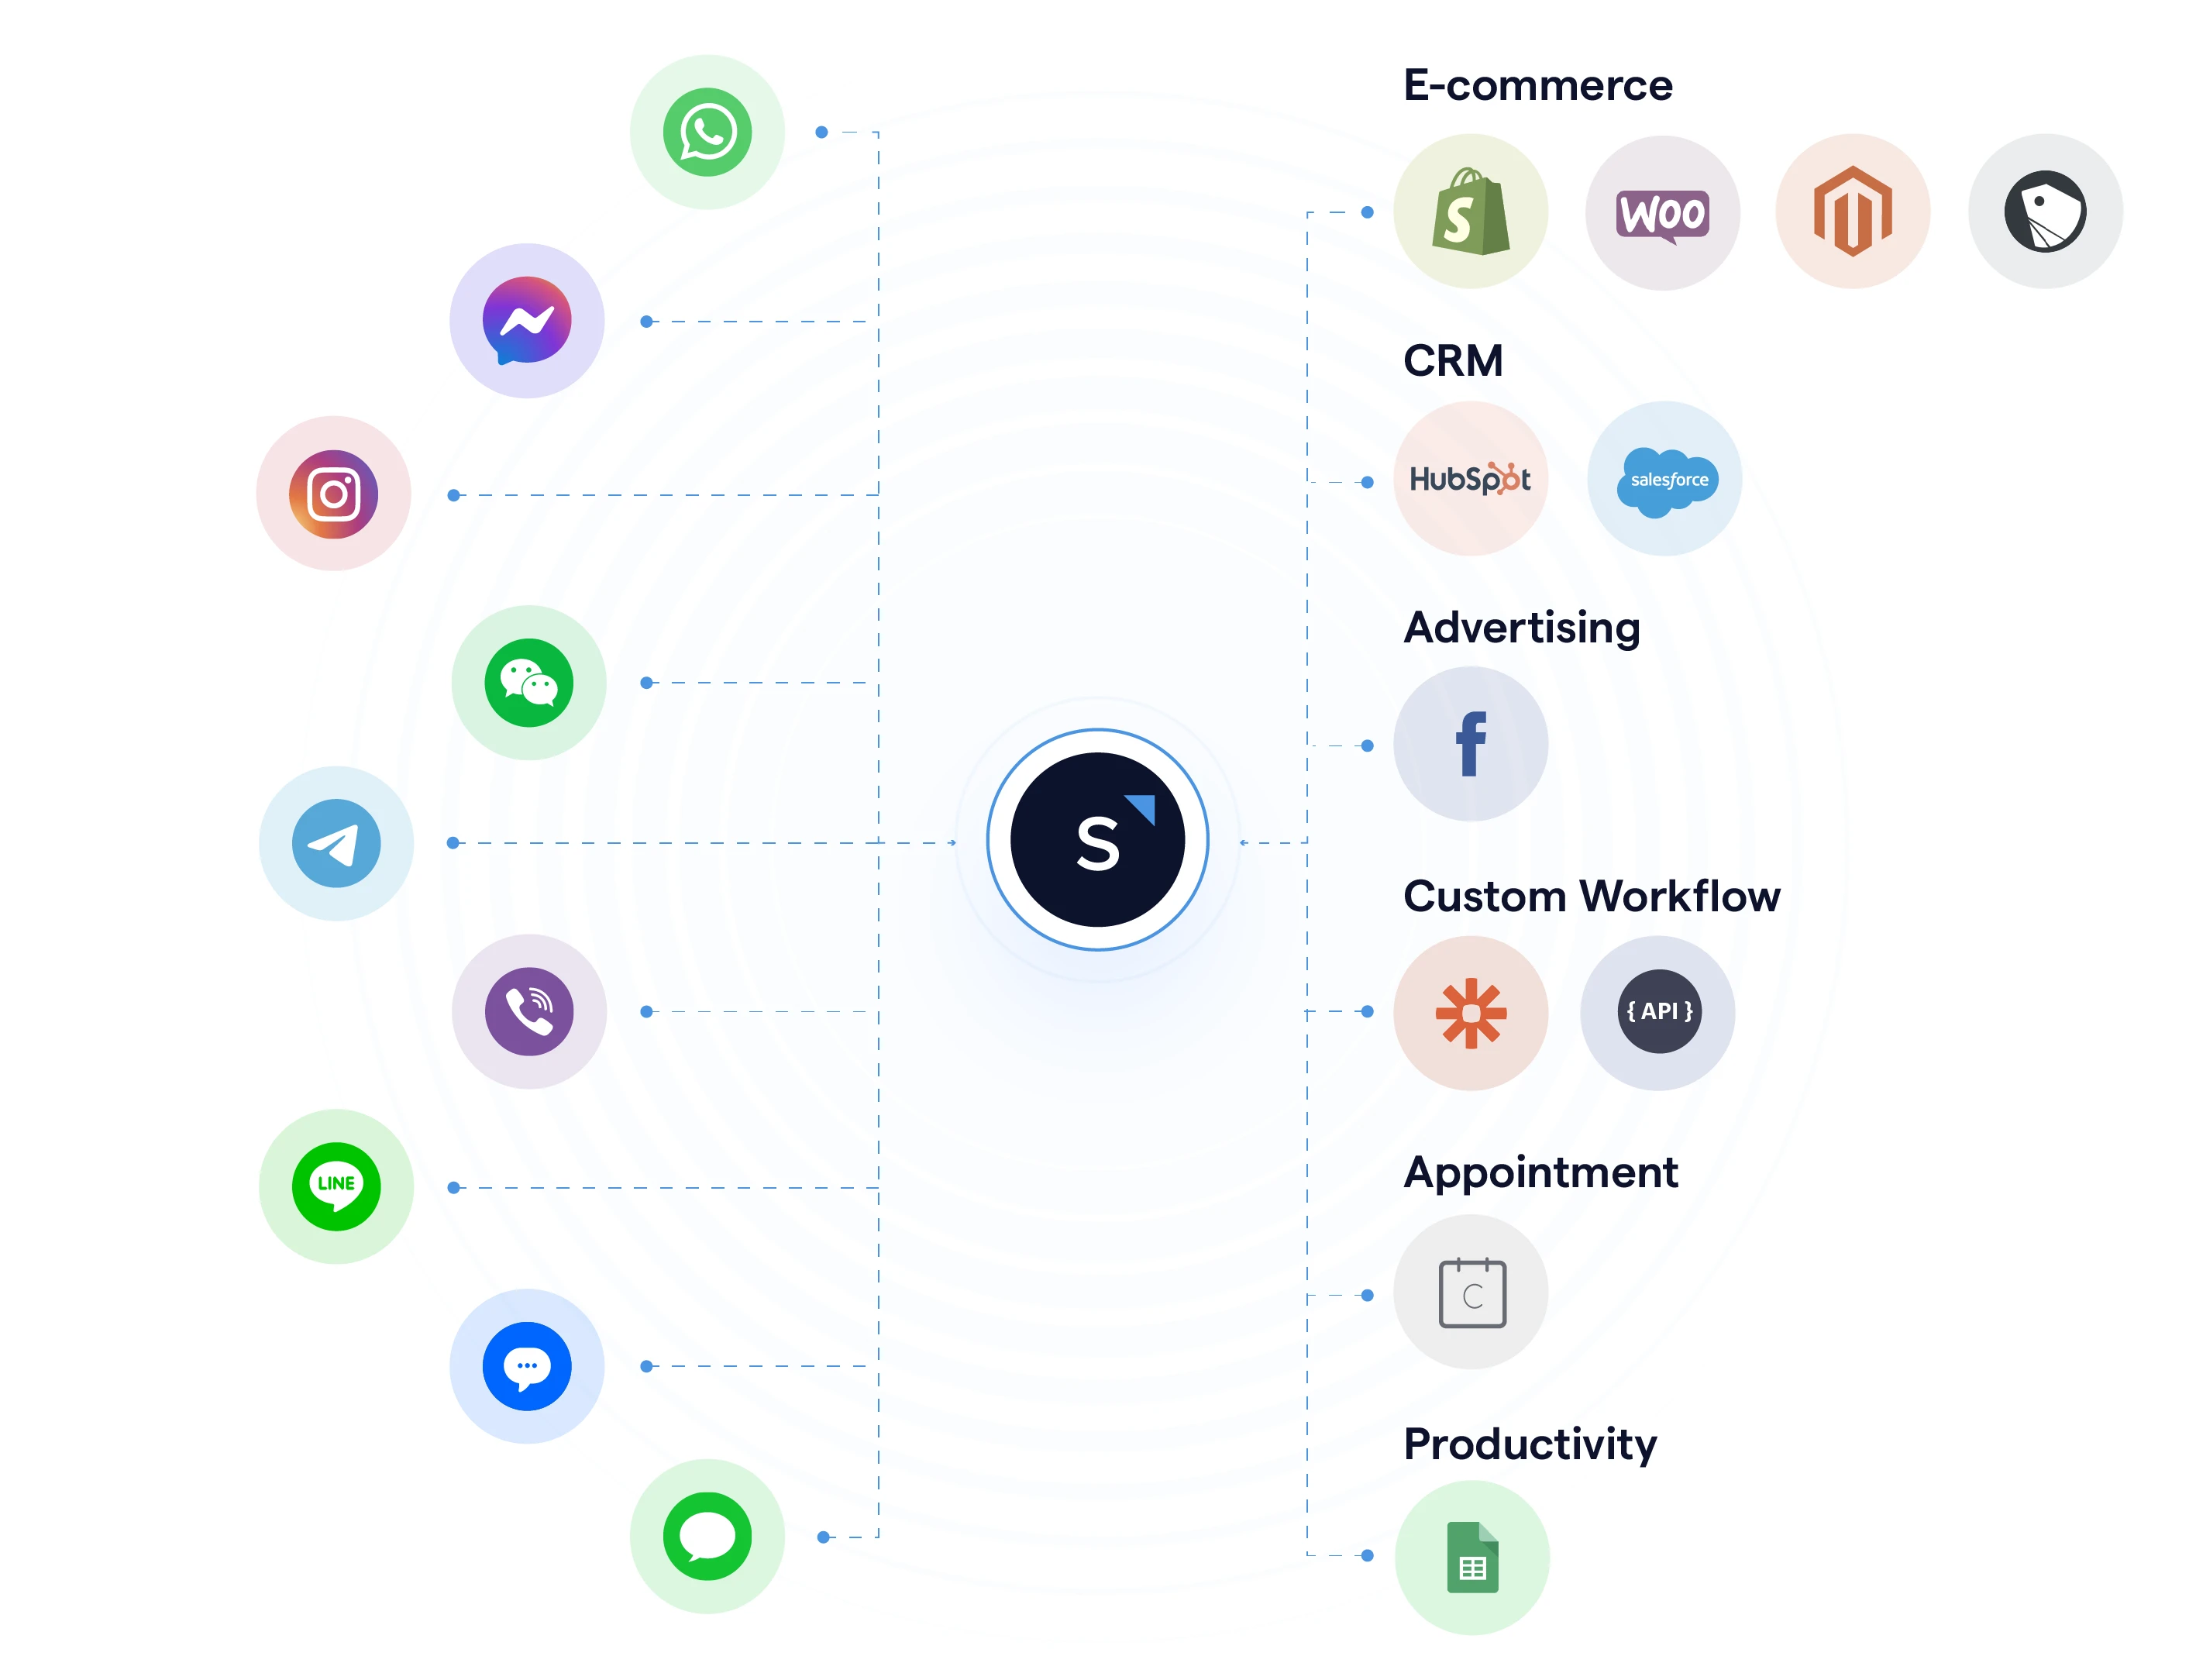 SleekFlow's integrations with other platforms